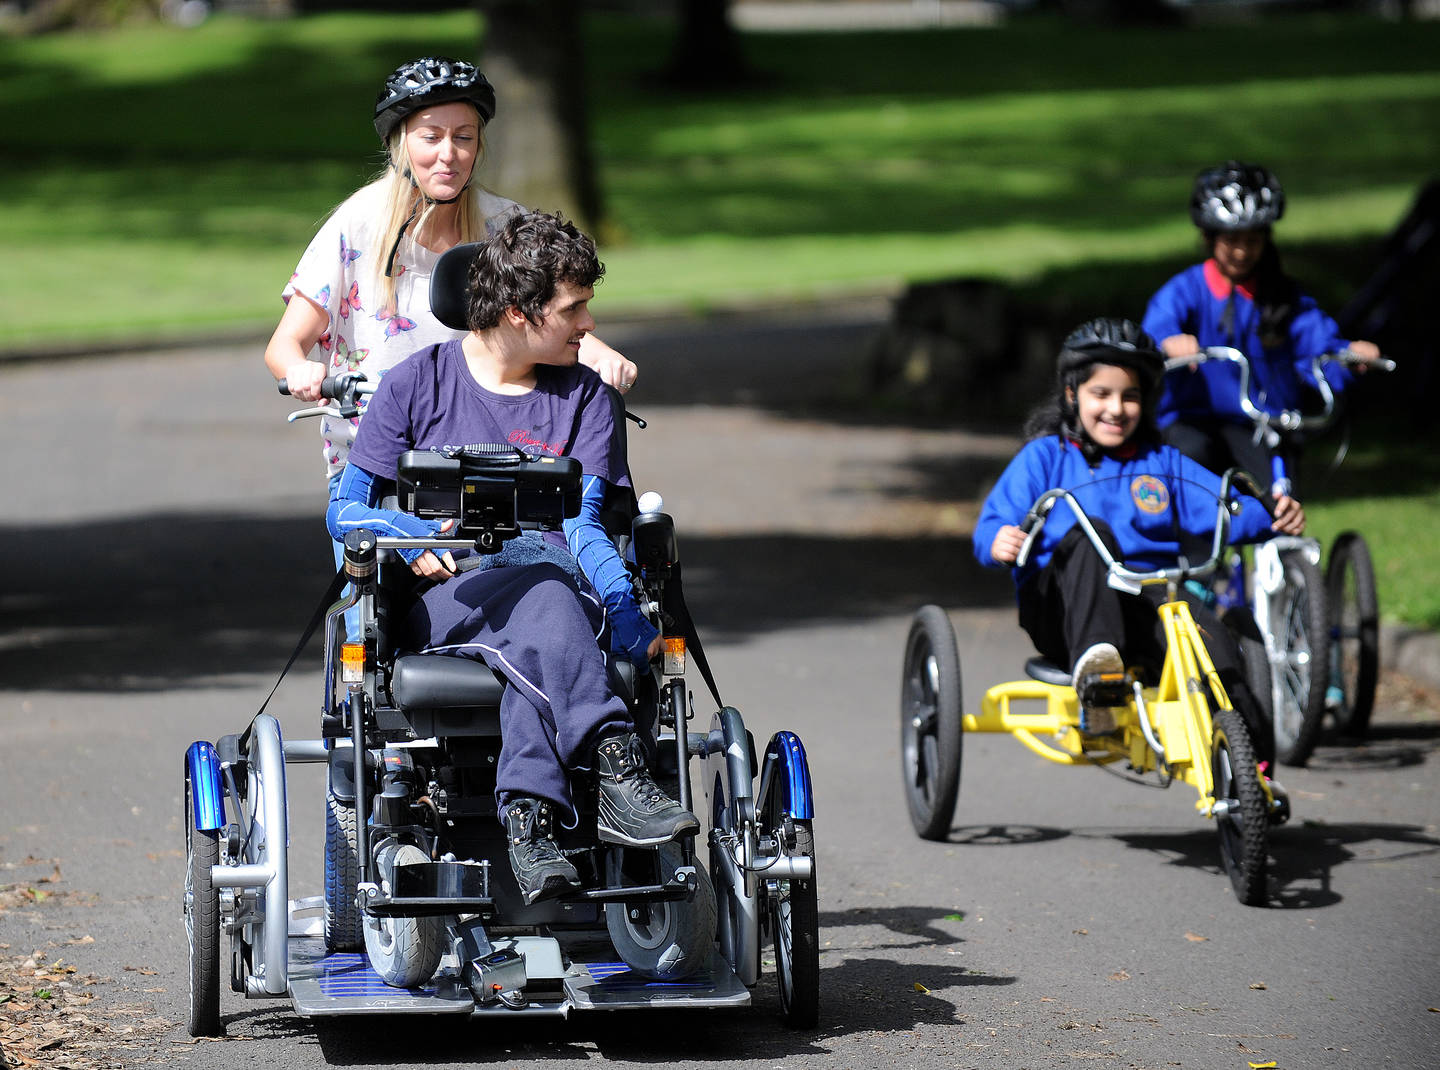 Young disabled people taking part in an adapted cycling session in the park